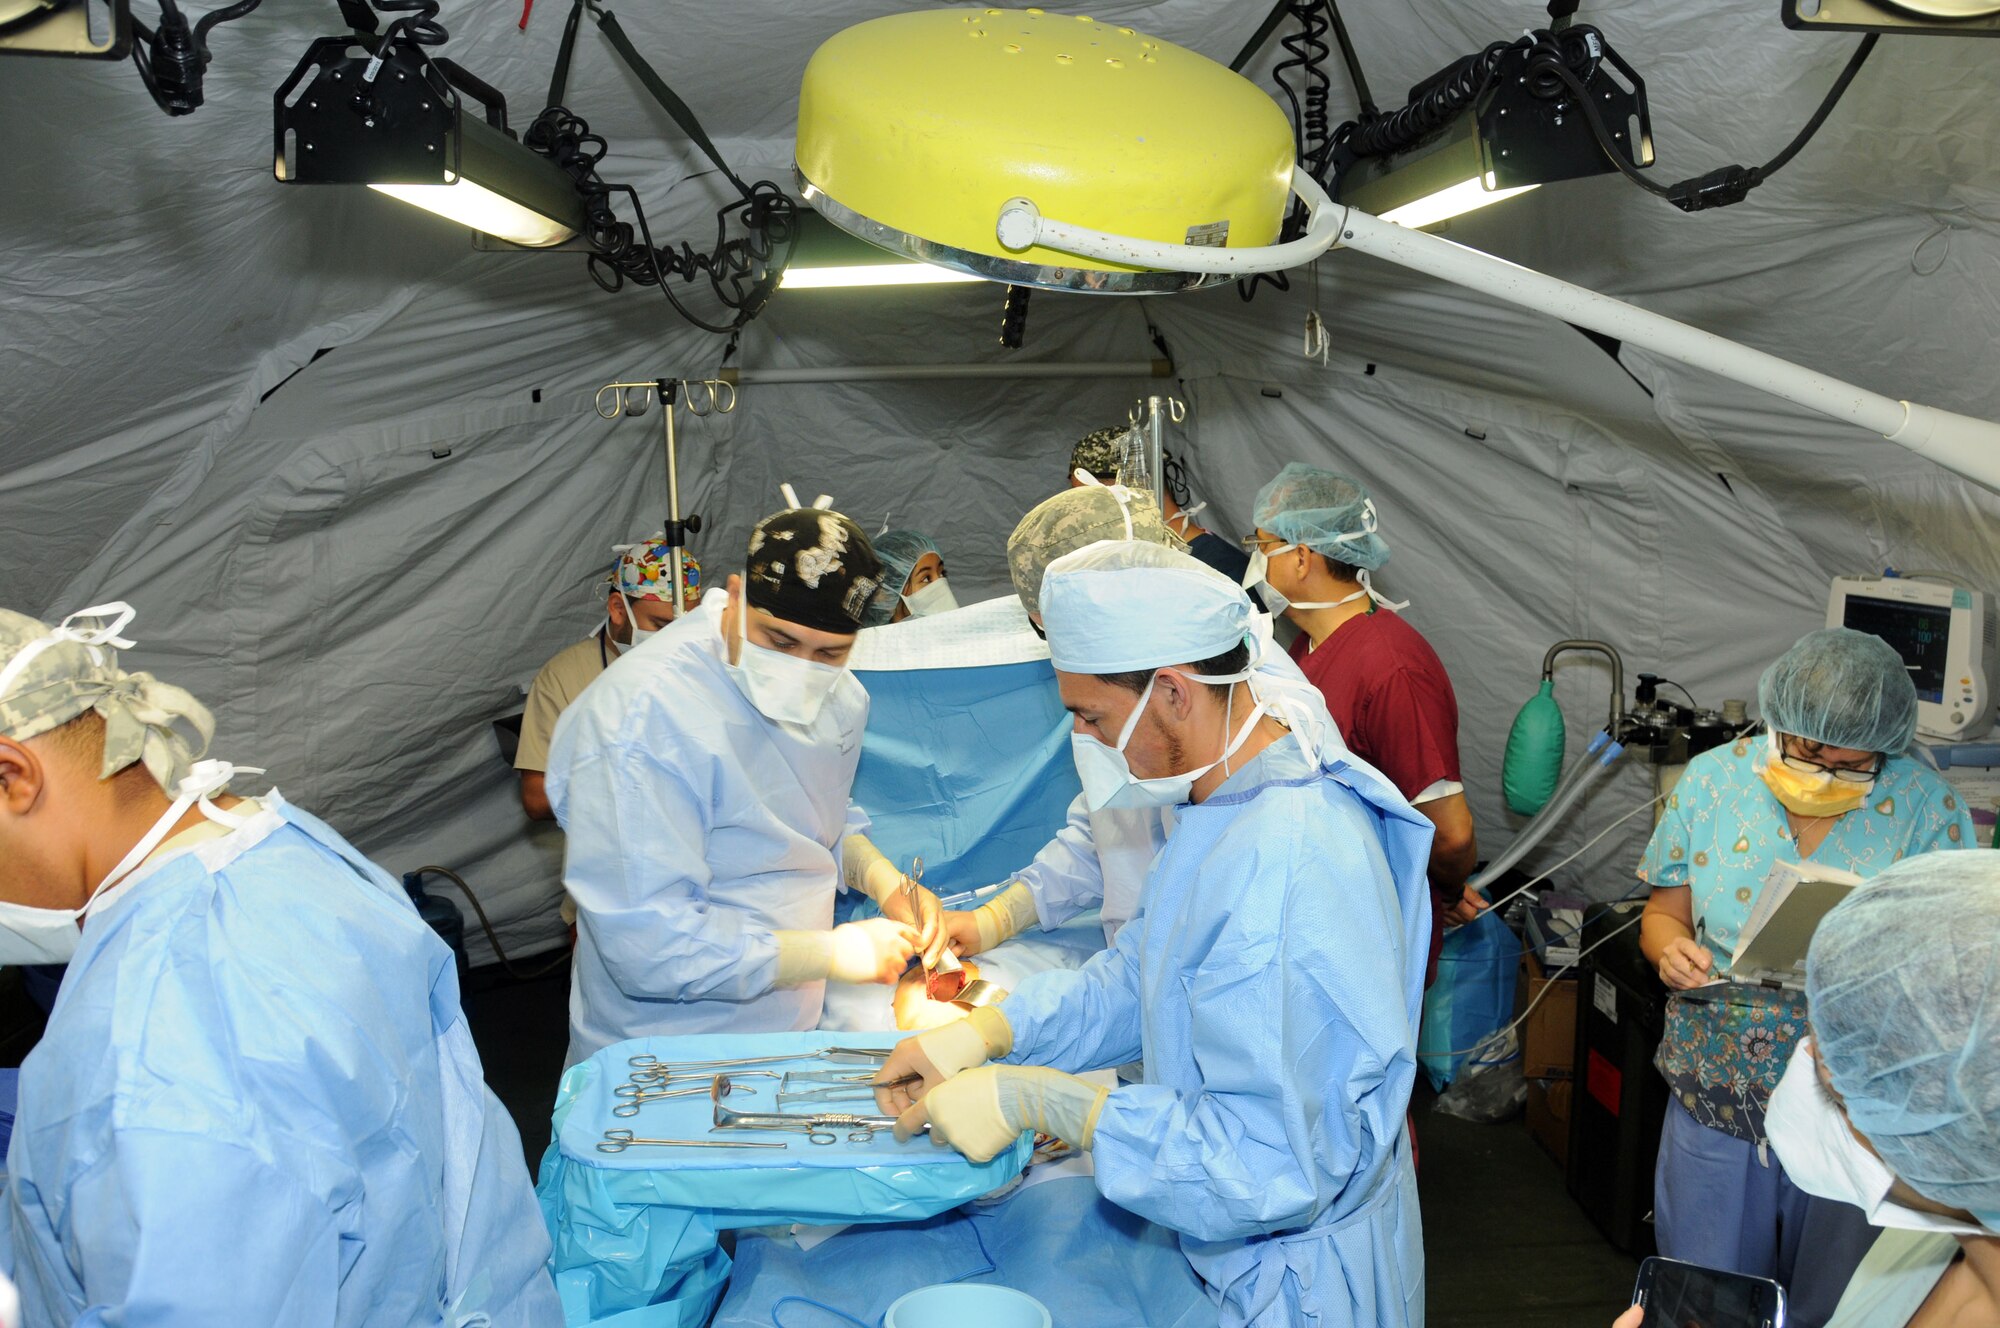 Joint Task Force-Bravo's Mobile Surgical Team and the surgical staff of the Santa Rosa hospital in the city of Santa Rosa de Copan, Department of Copan, Honduras perform gall bladder removal surgery on a Honduran man during a Medical Readiness Training Exercise May 5-9.  These surgeries, which are often very expensive for Honduran nationals, were provided free of charge.  The work of the MST helped support Honduran medical capabilities while continuing to strengthen the relationship between JTF-Bravo and its partner nation.  (Photo by U. S. Air National Guard Capt. Steven Stubbs)